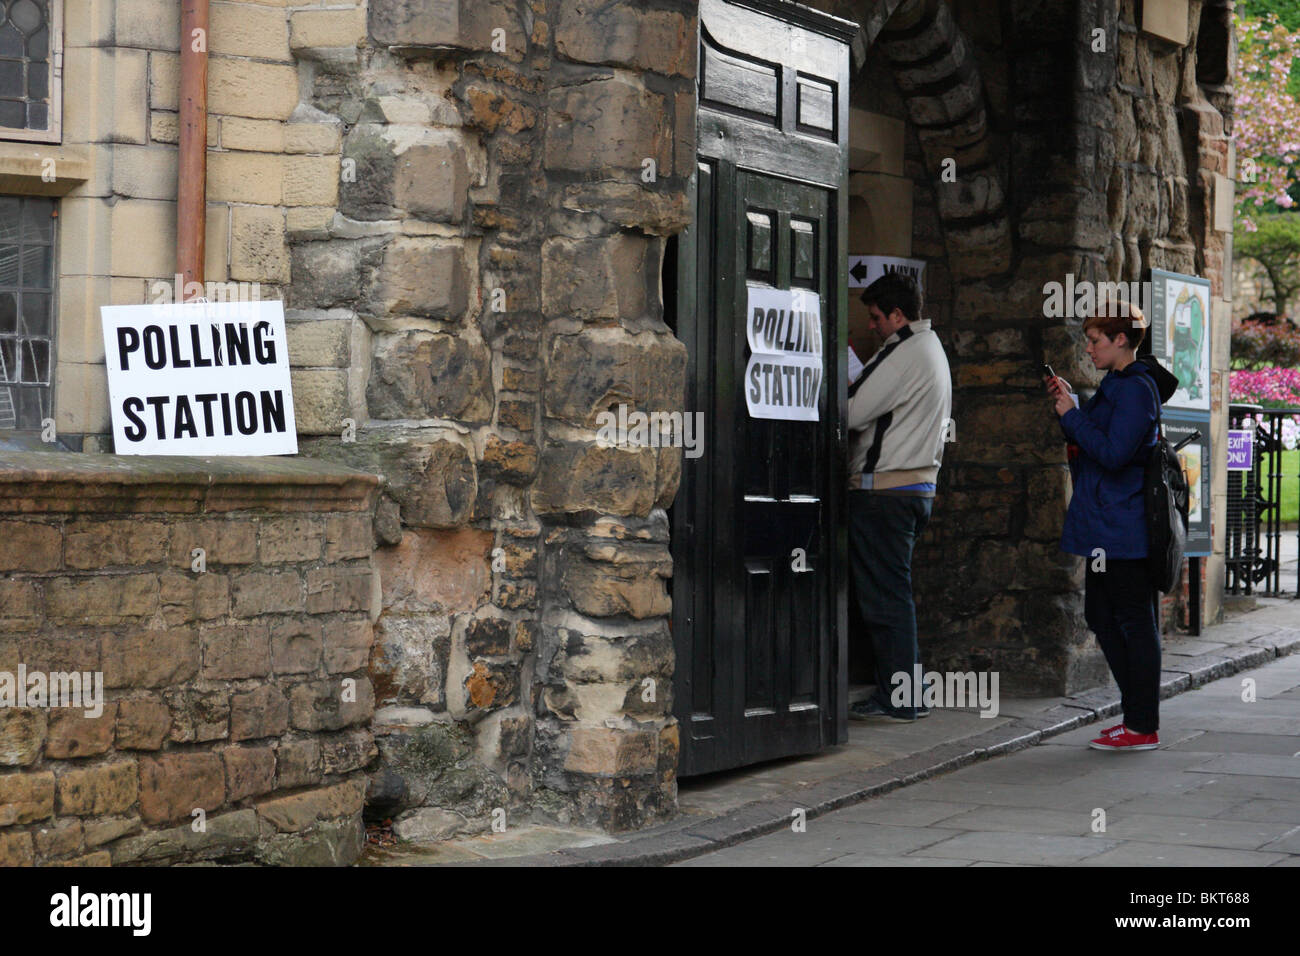 Voters queuing at Polling Station located in the gatehouse at Nottingham Castle, Nottingham, England, U.K. Stock Photo